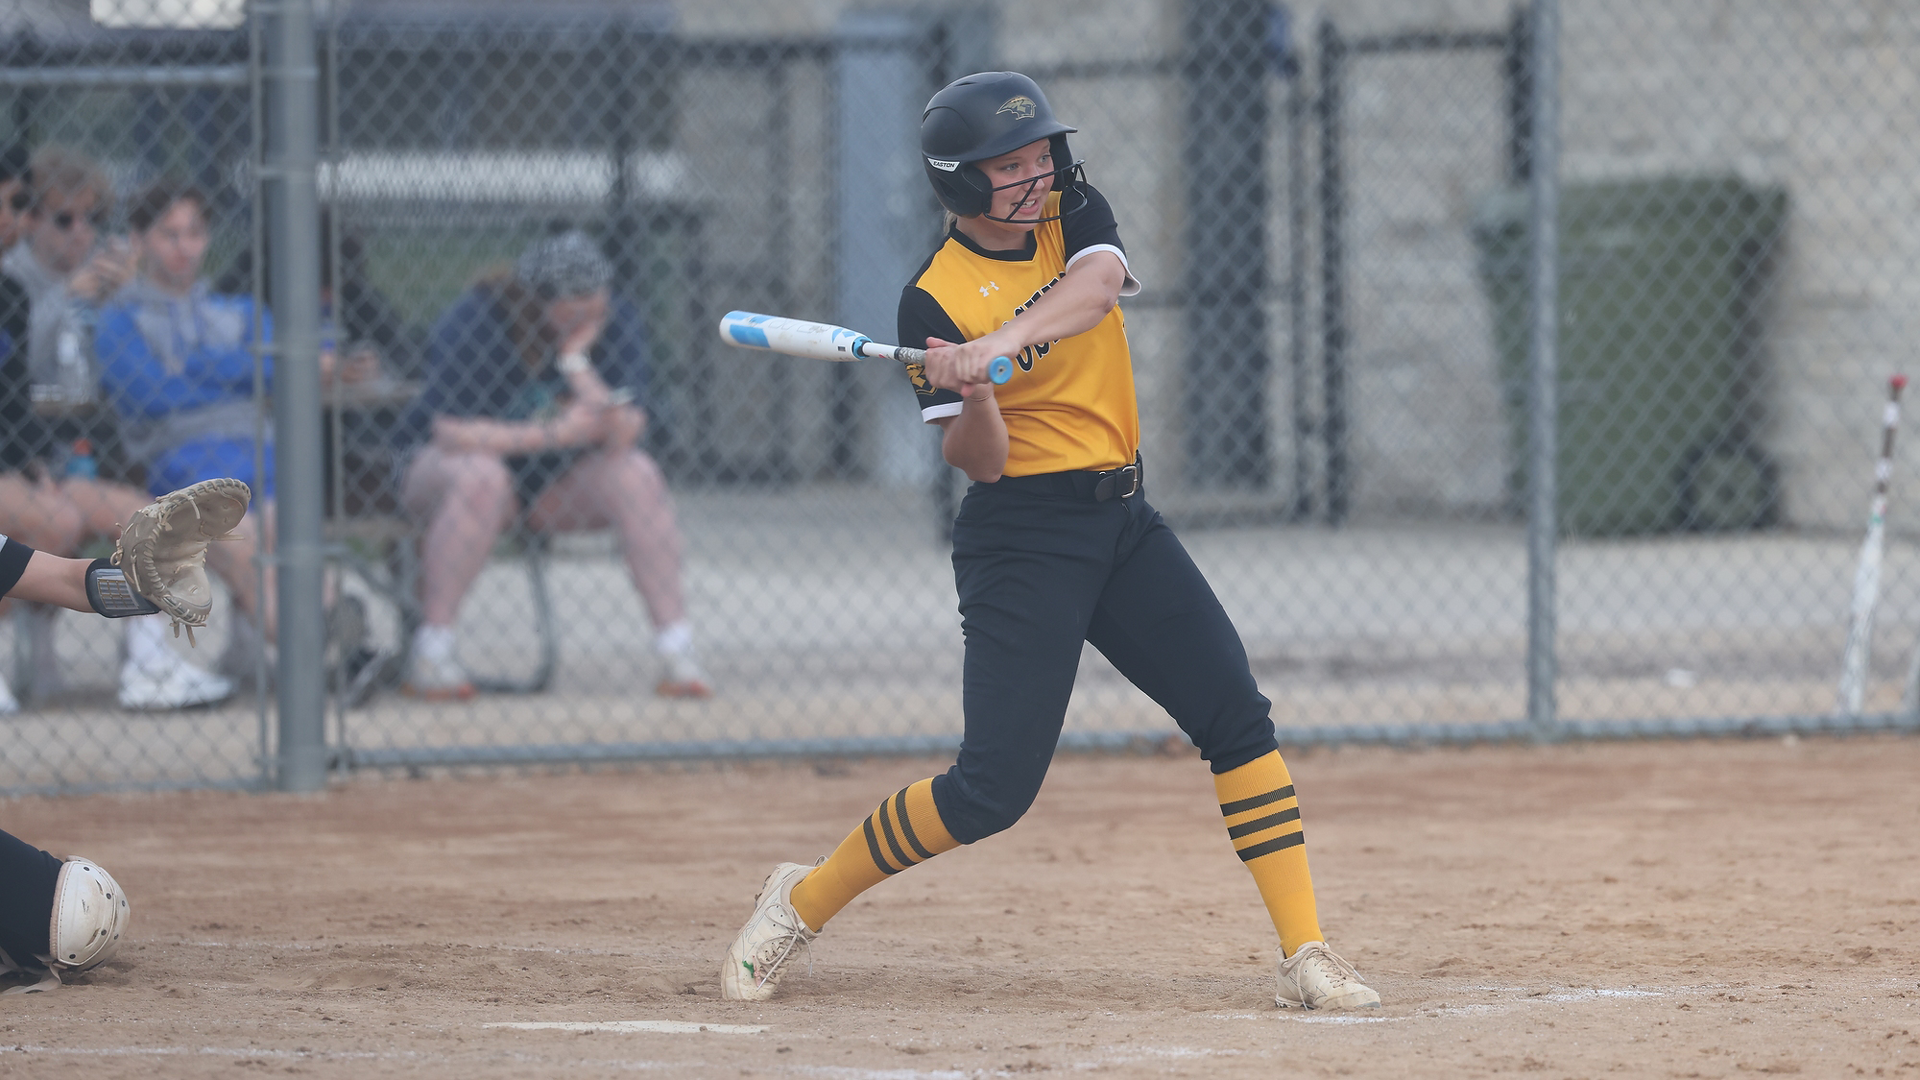 Sarah Hammerton hit her first career home run as the Titans swept Marian on Wednesday. Photo Credit: Steve Frommell, UW-Oshkosh Sports Information